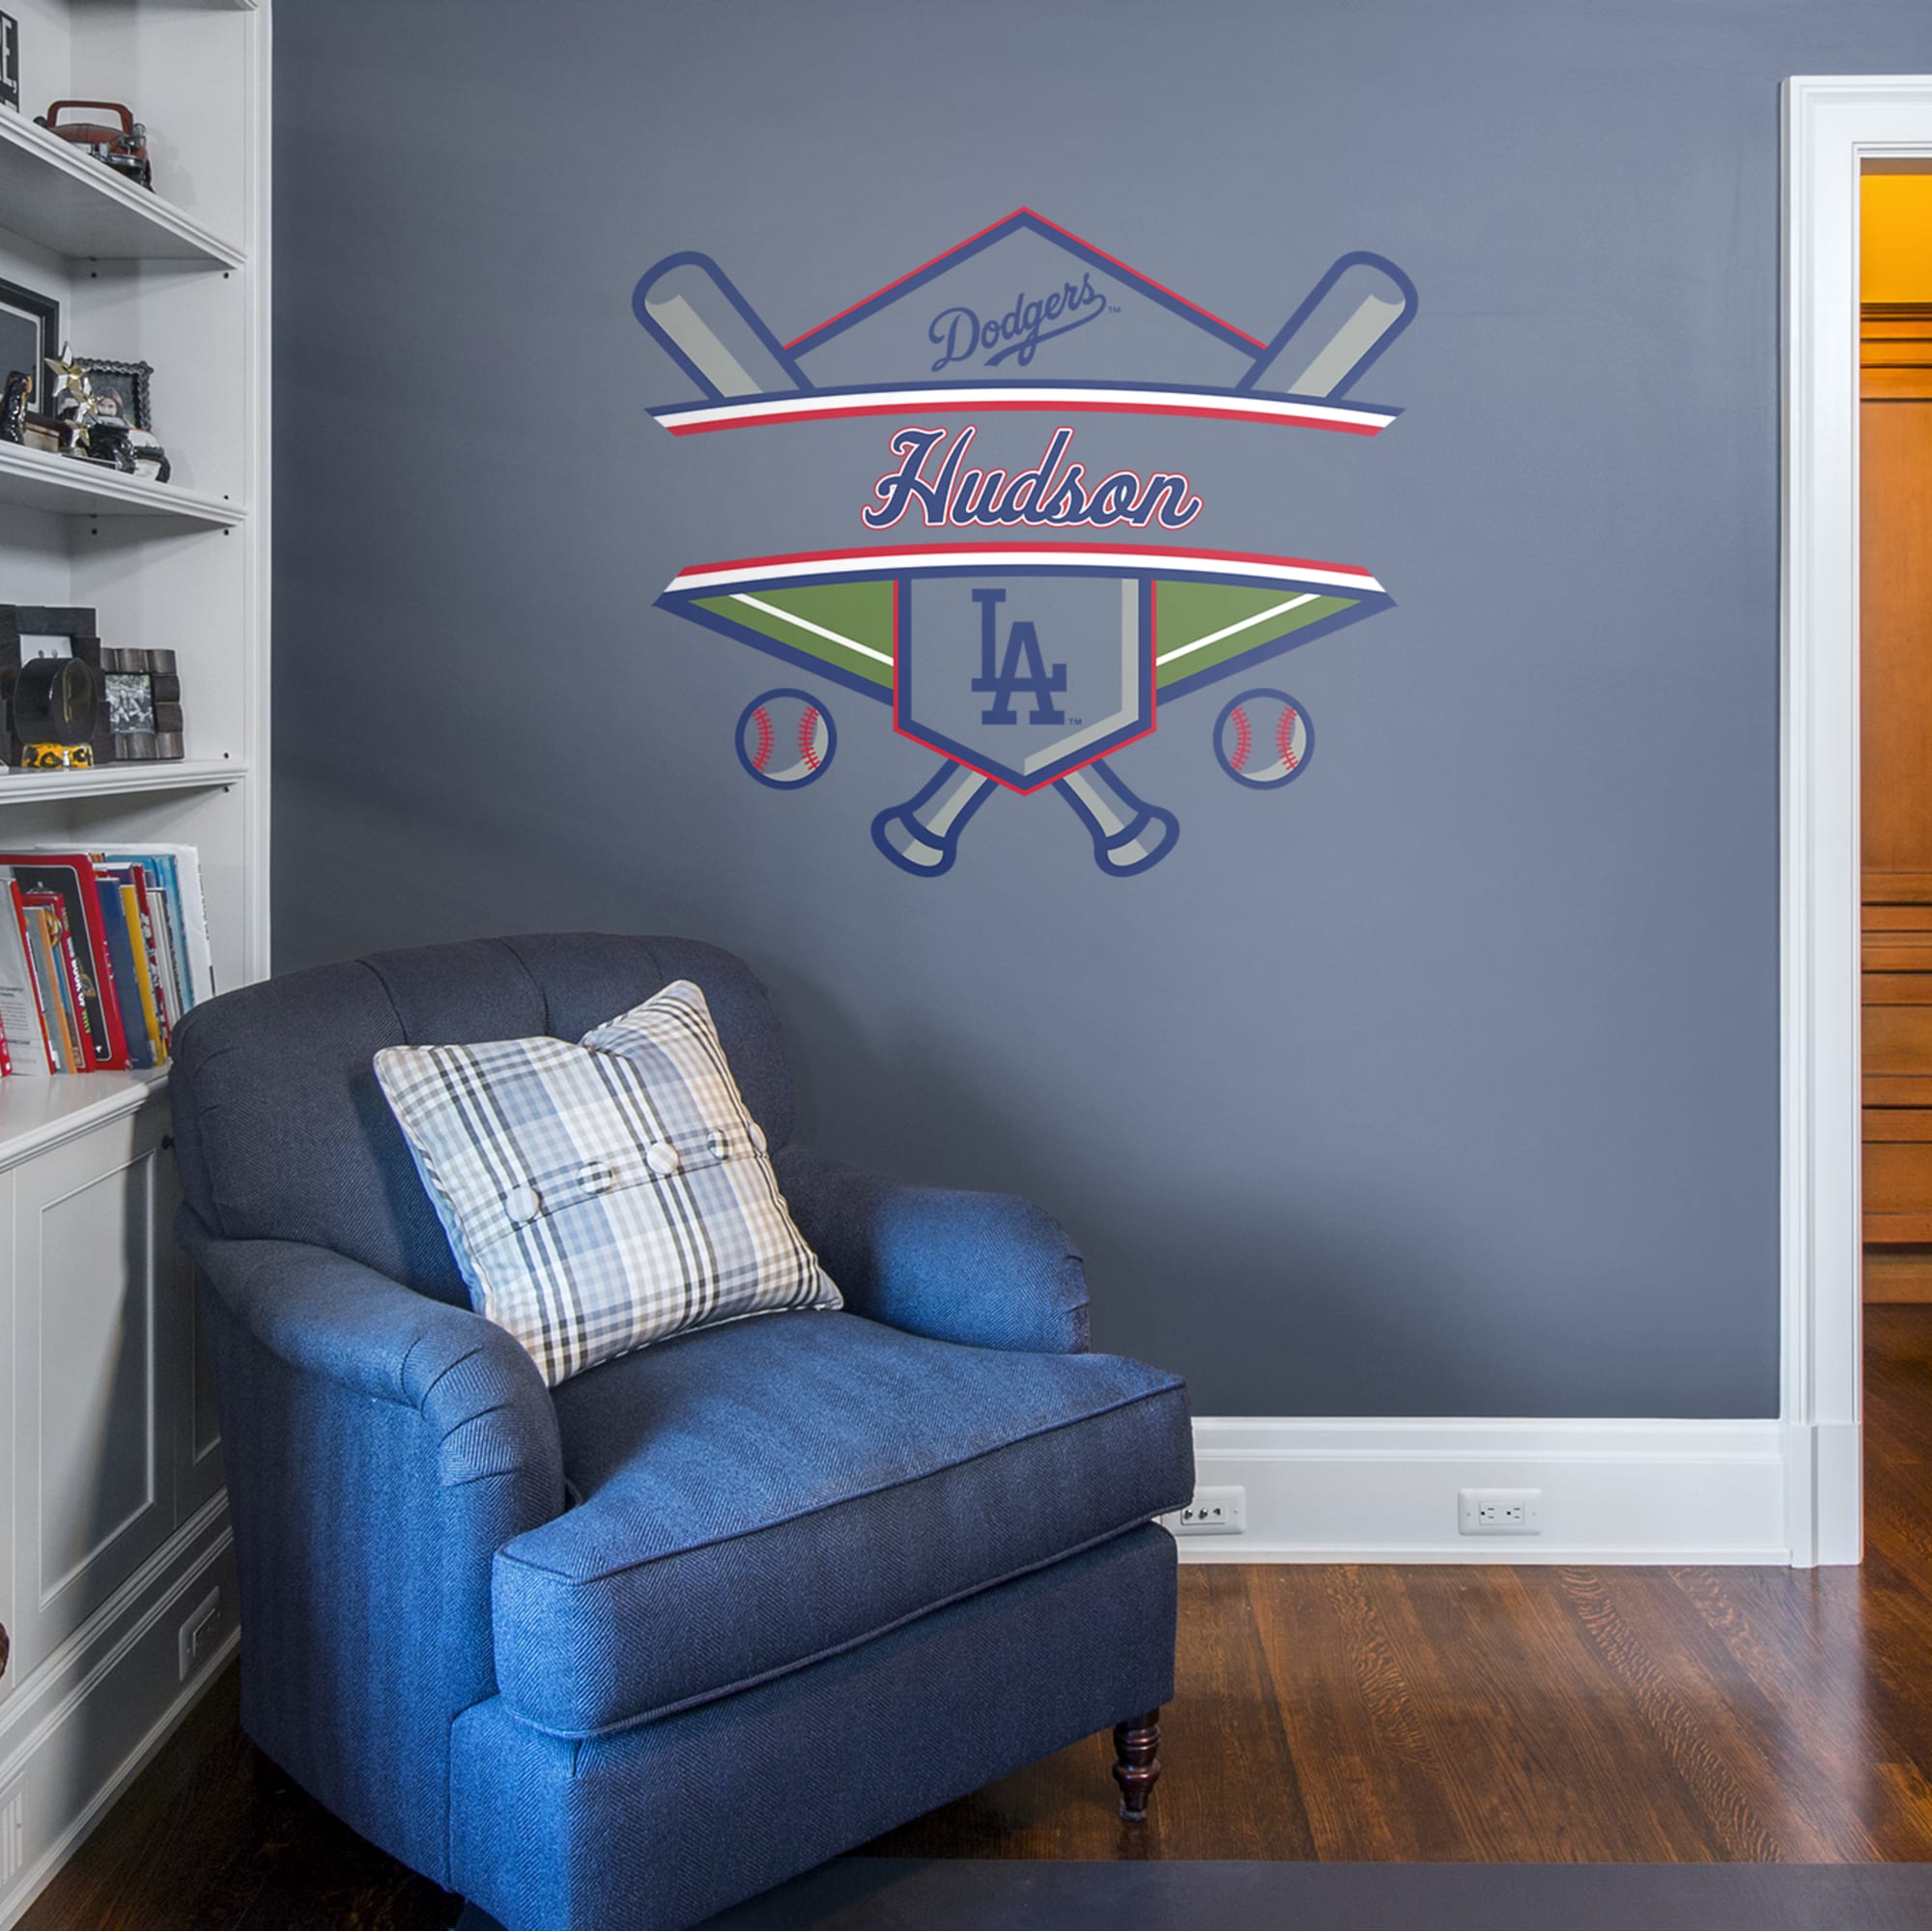 Los Angeles Dodgers: Personalized Name - Officially Licensed MLB Transfer Decal 45.0"W x 39.0"H by Fathead | Vinyl